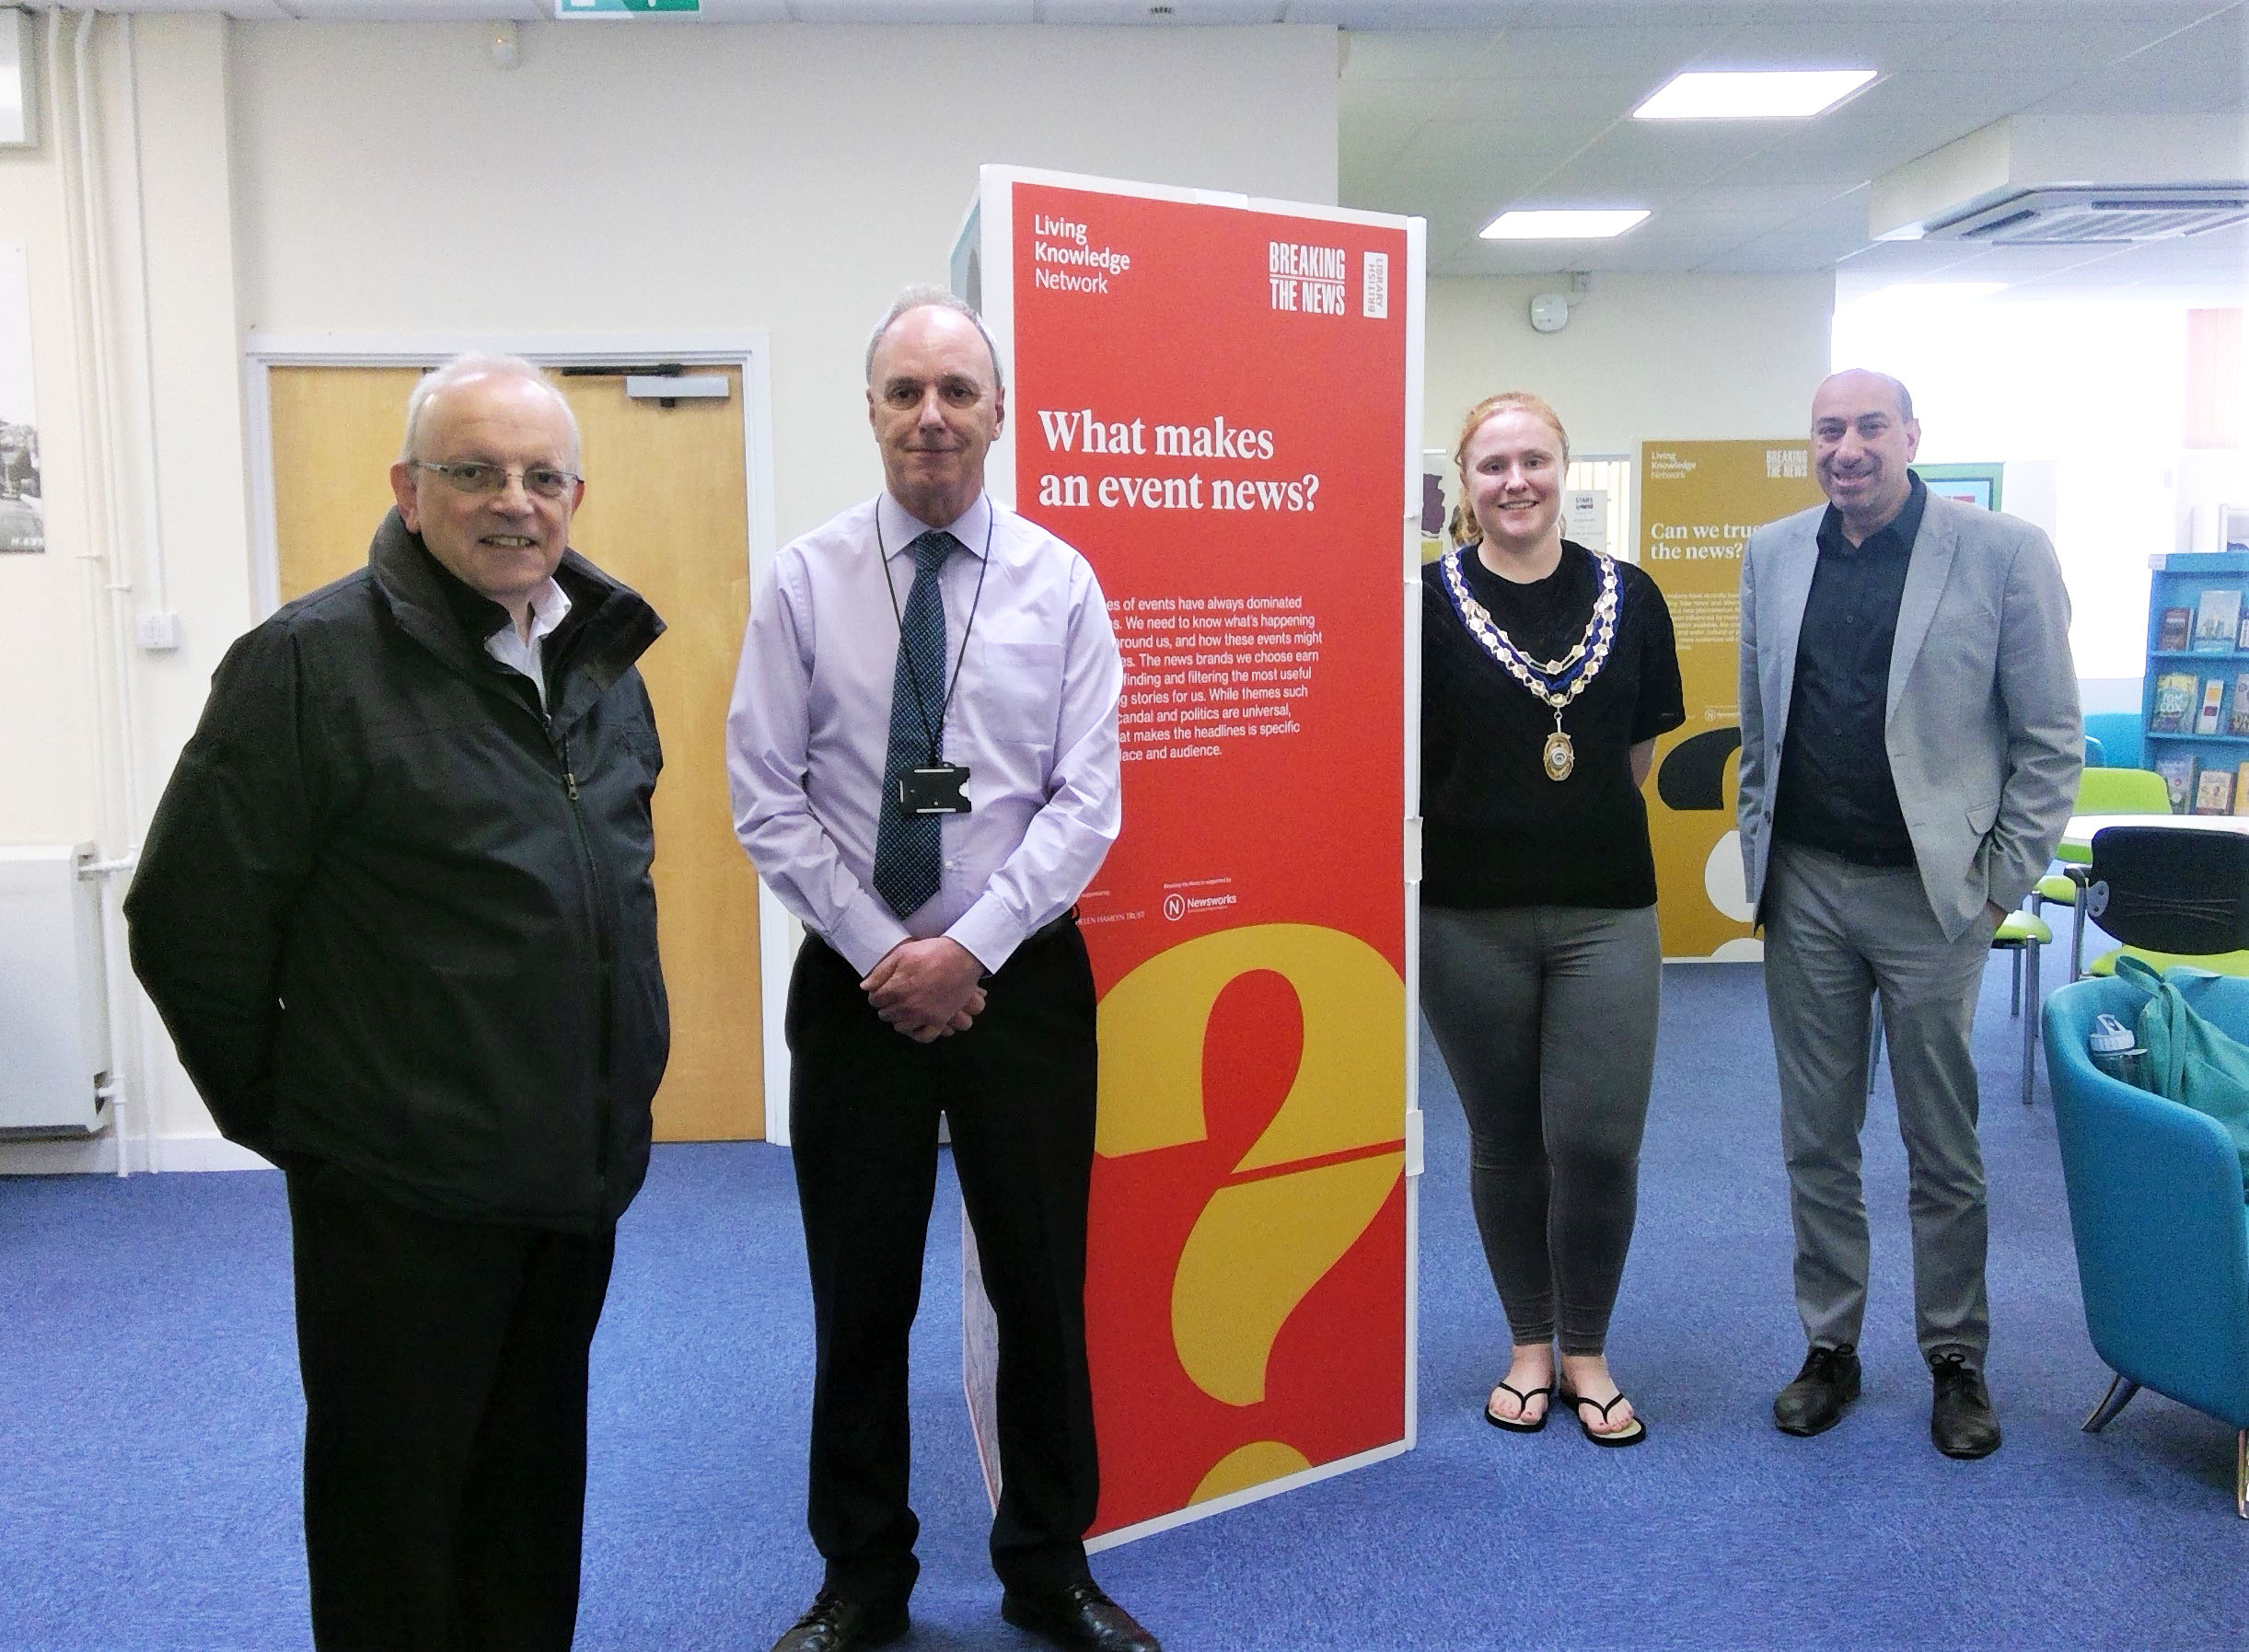 Pictured from left to right: Cllr Richard Dickson, Cllr Andy Jenns, Kenilworth Deputy Mayor Samantha Cooke, and Warwickshire Libraries Service Manager Ayub Khan